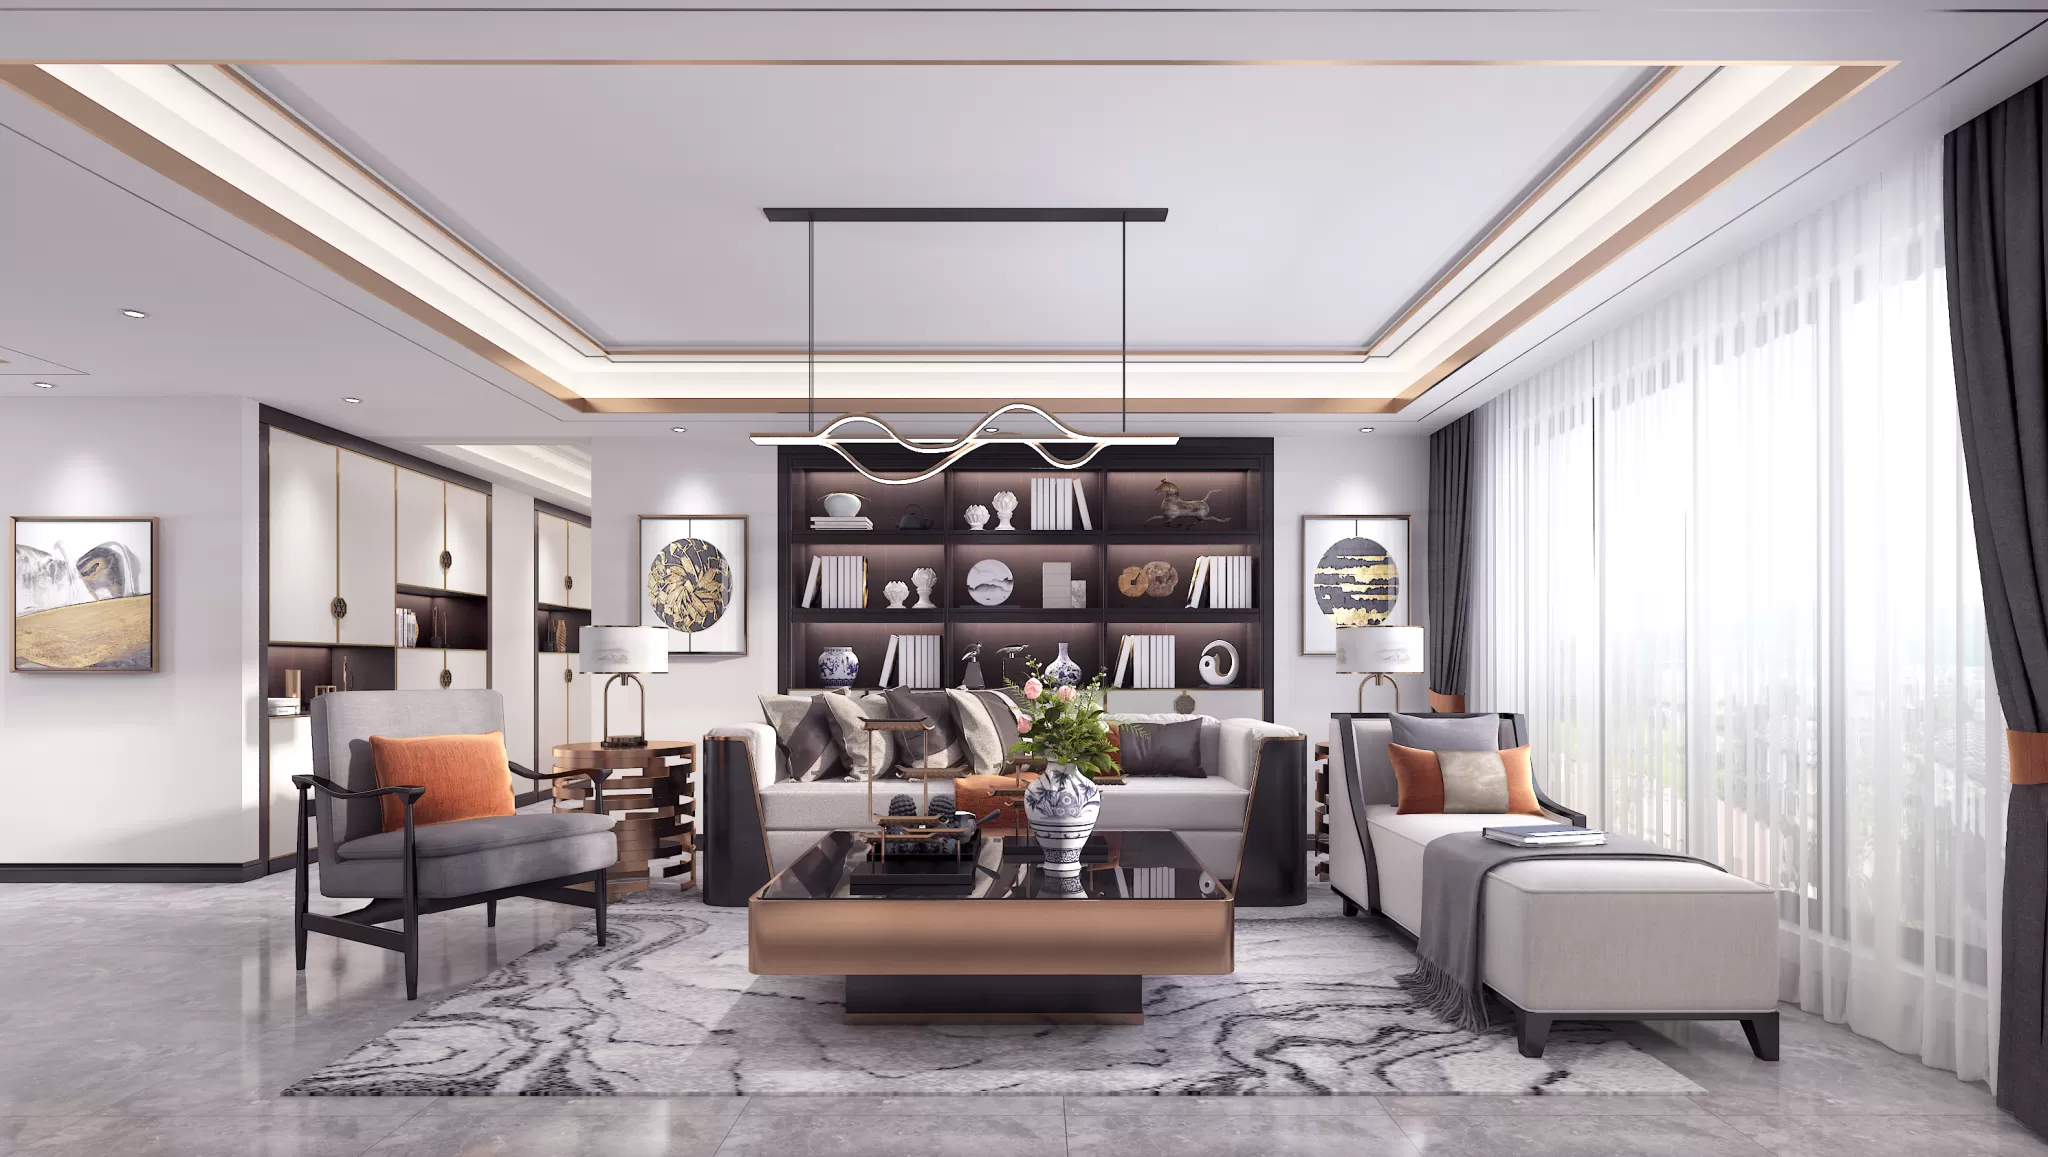 DESMOD INTERIOR 2021 (VRAY) – 4. LIVING ROOM – CHINESE – 106